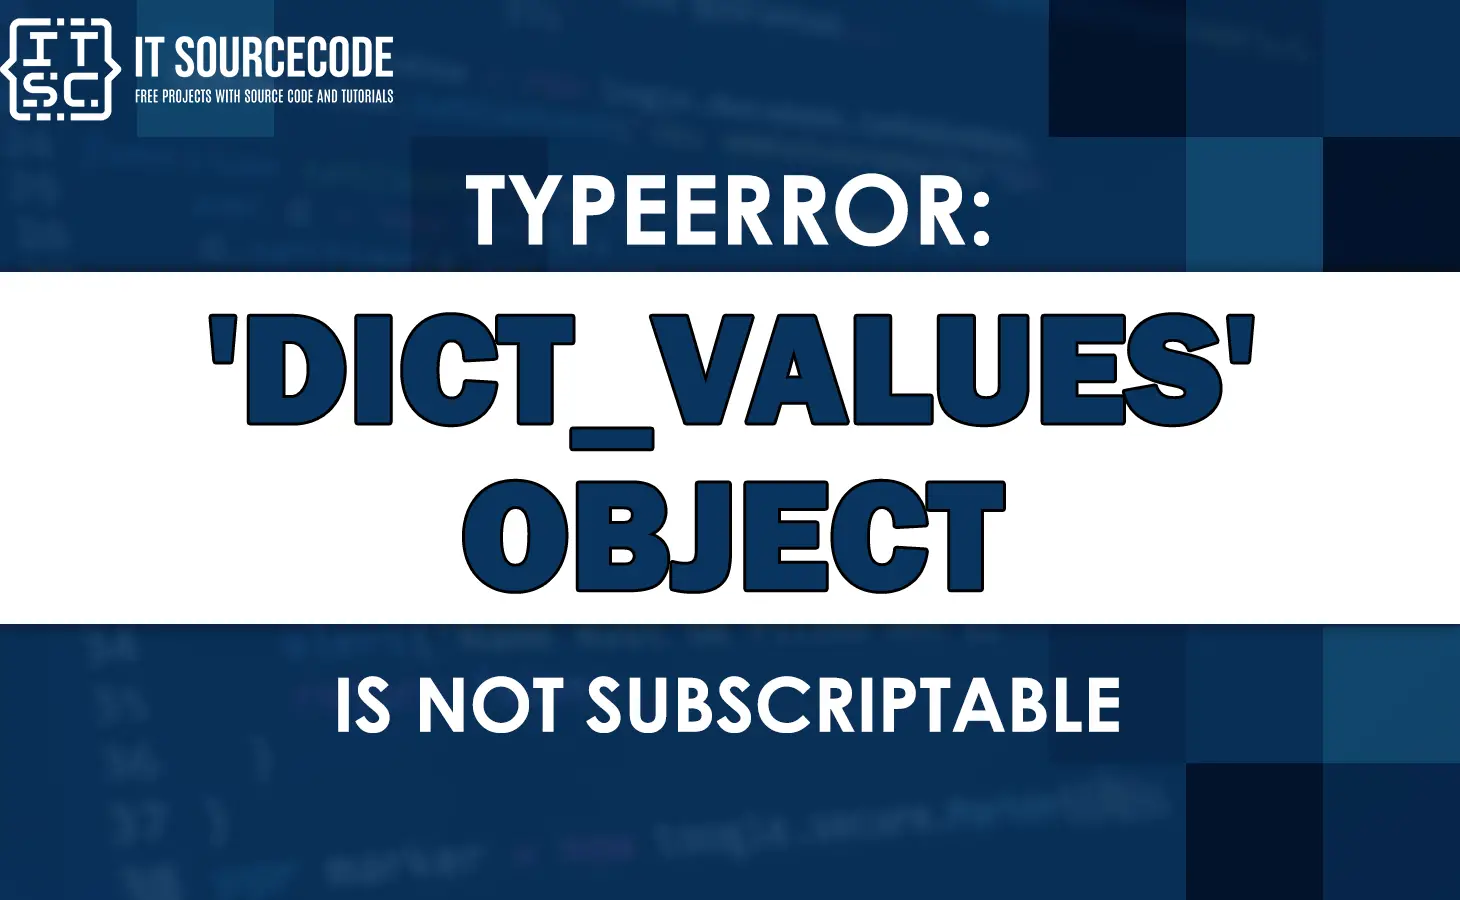 Typeerror: dict_values object is not subscriptable [SOLVED]